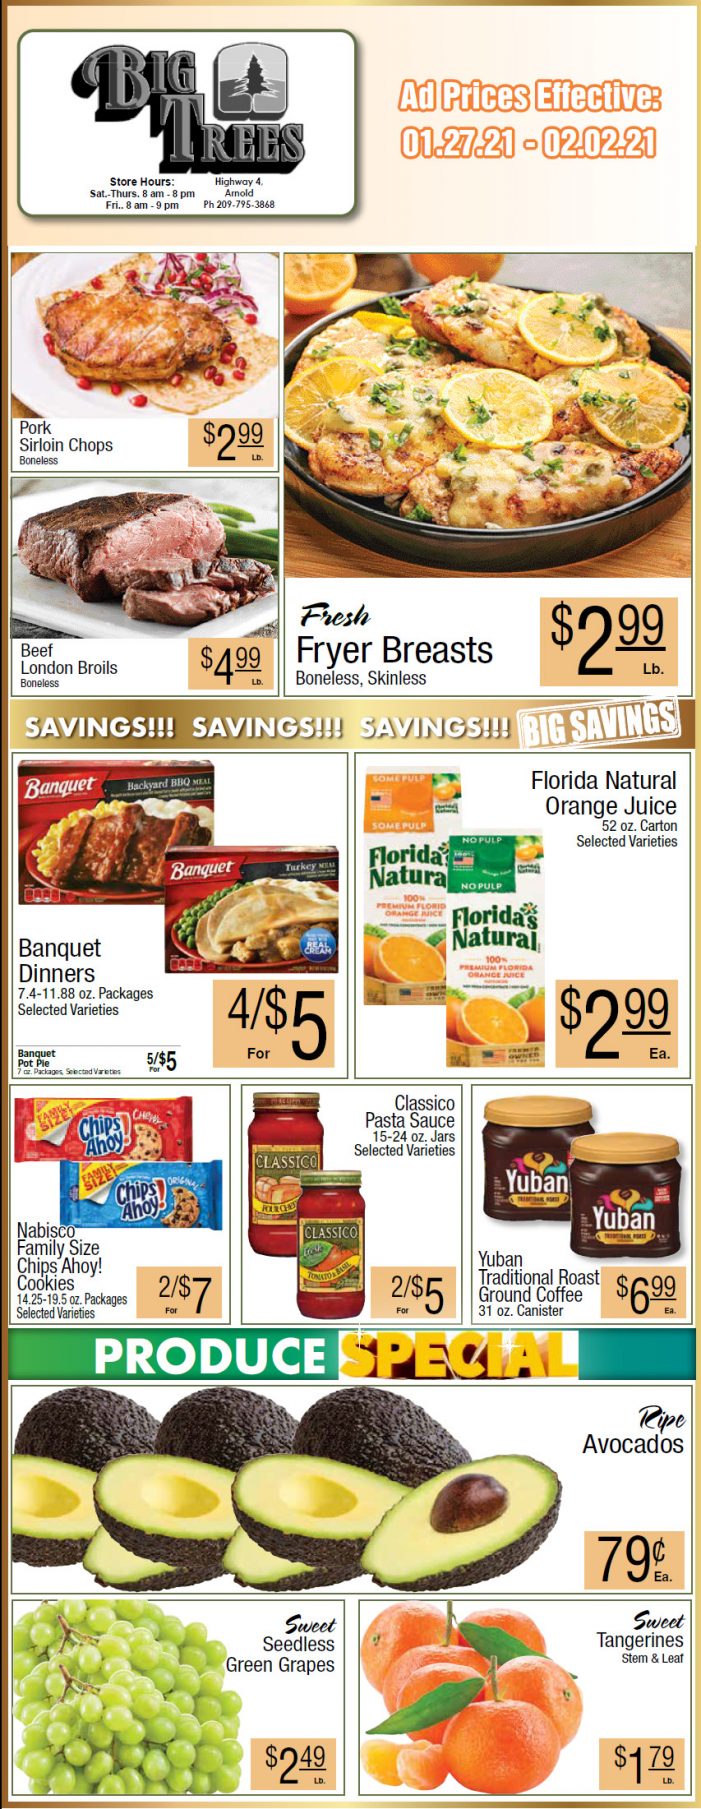 Big Trees Market Weekly Ad & Grocery Specials Through February 2nd!